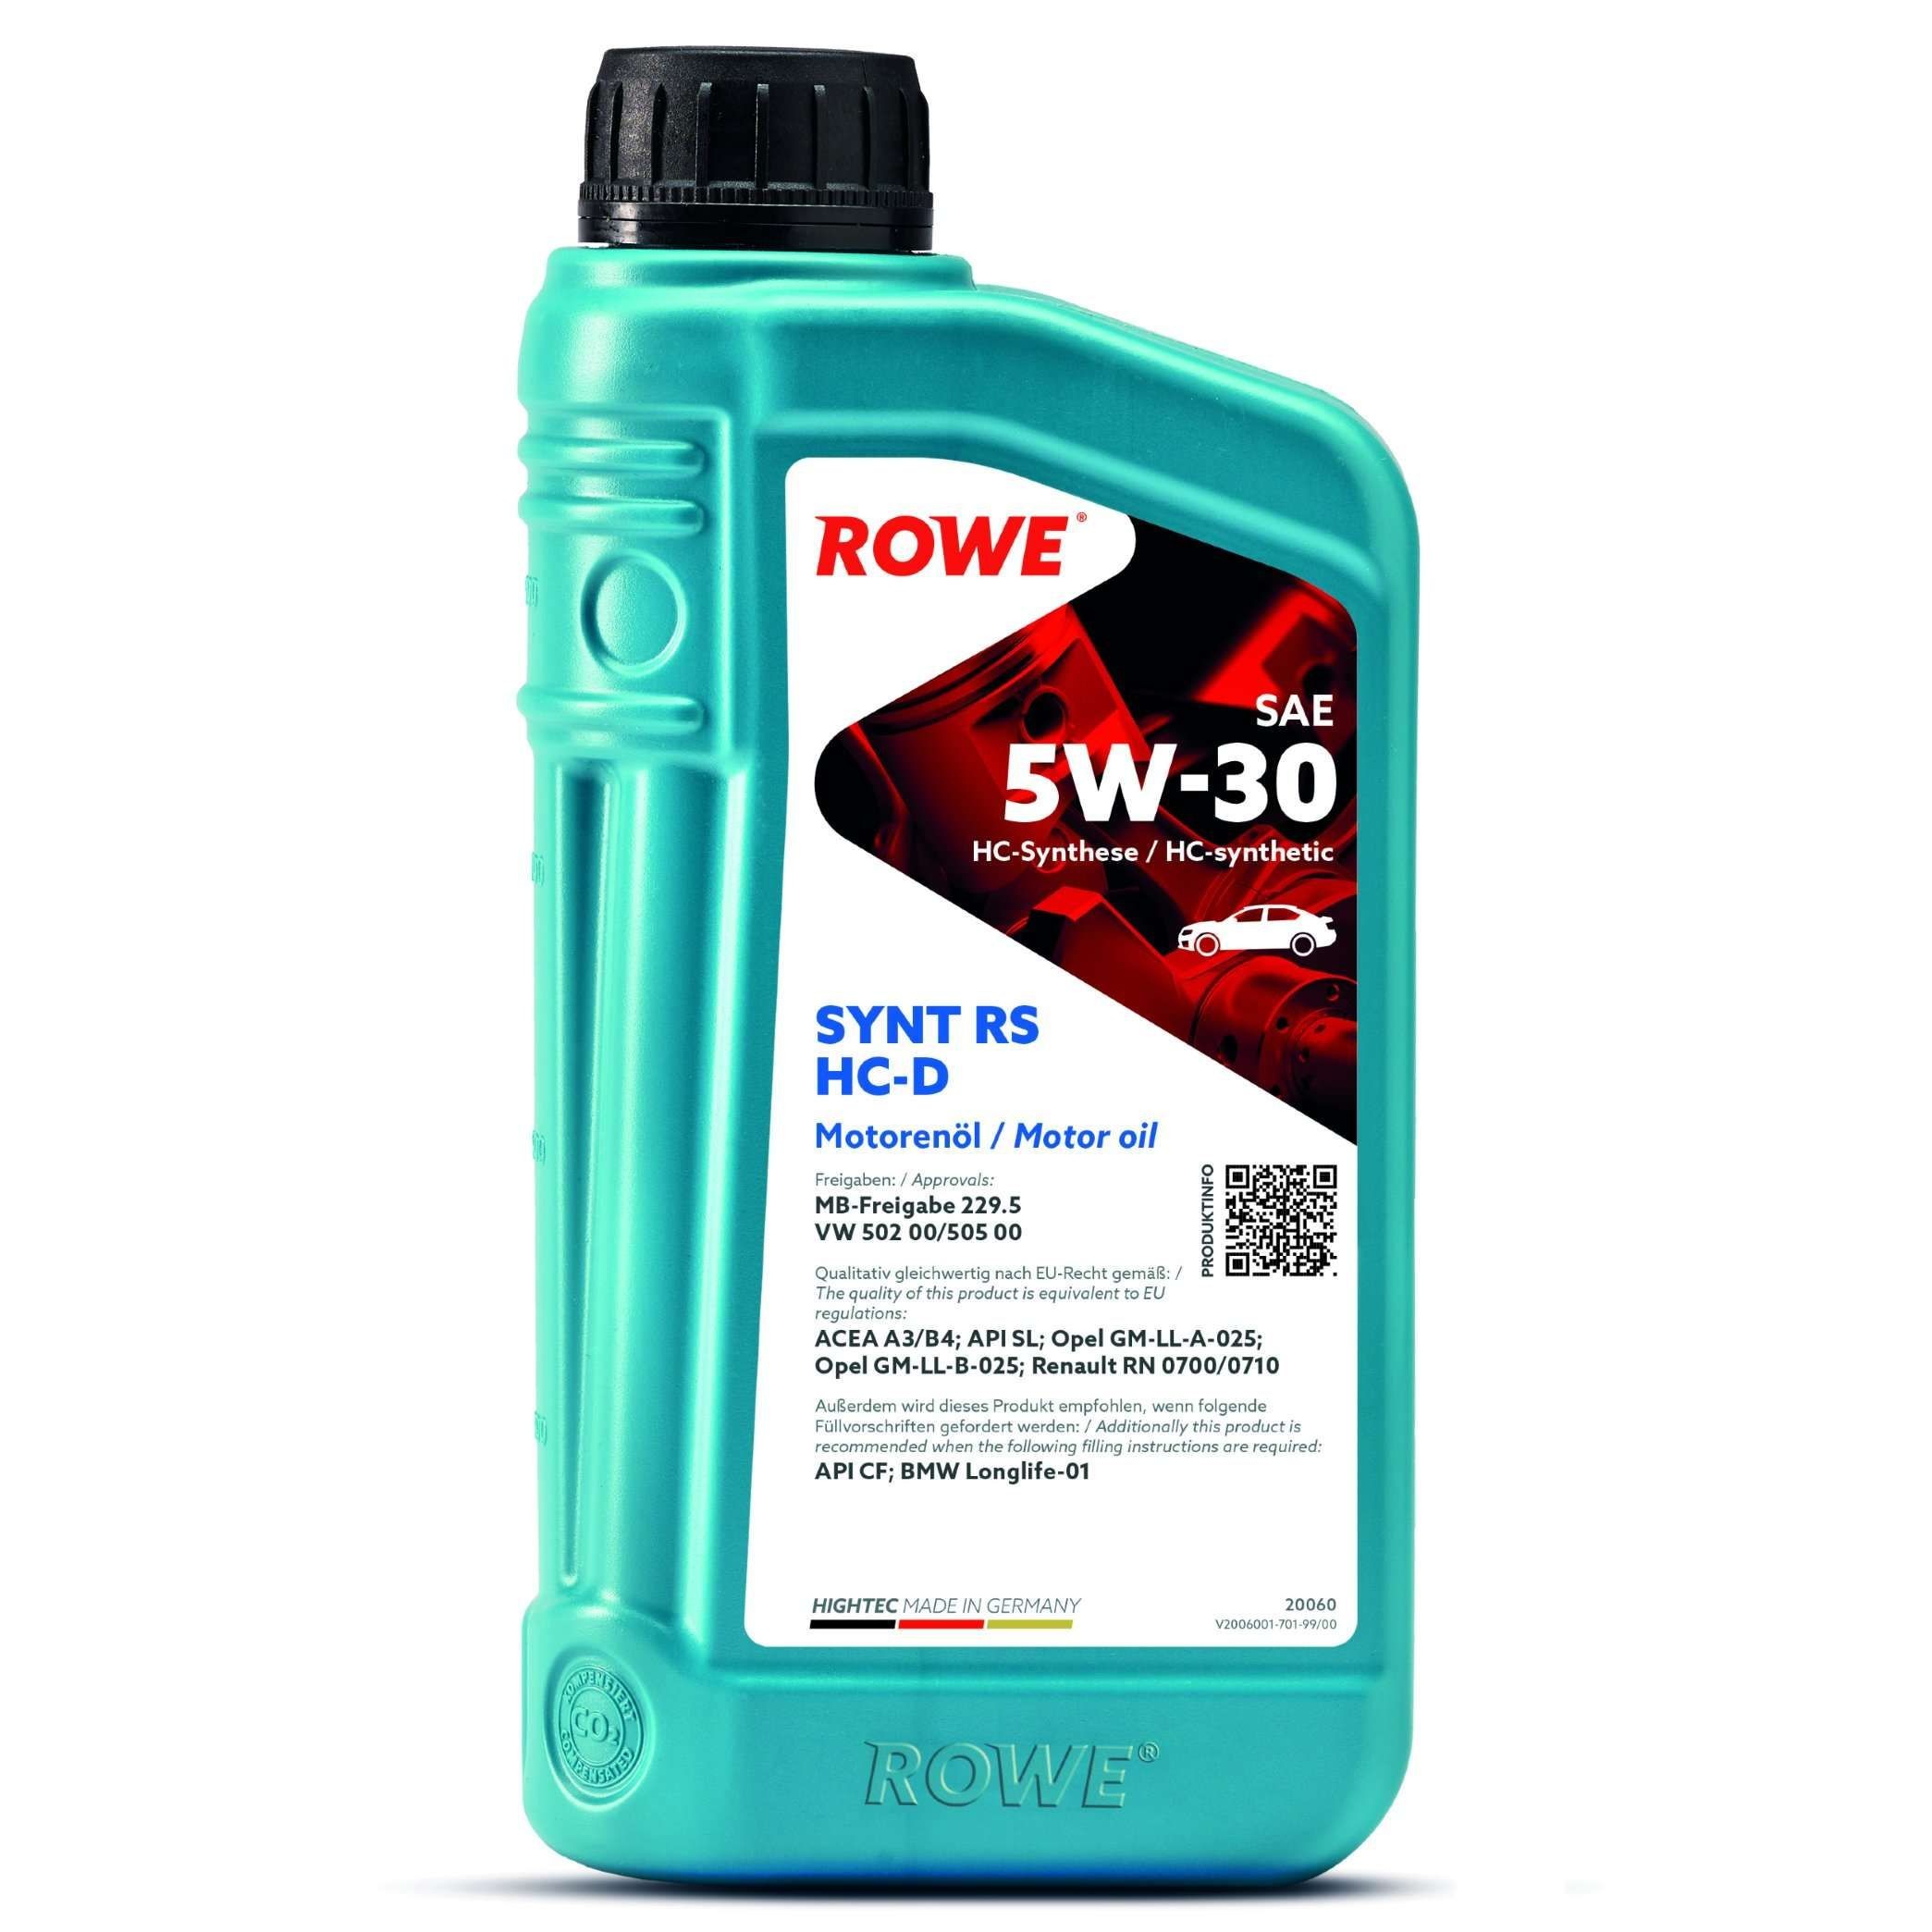 20060-0010-99 ROWE Oil AUDI 5W-30, 1l, HC synth. oil (hydro-cracked)